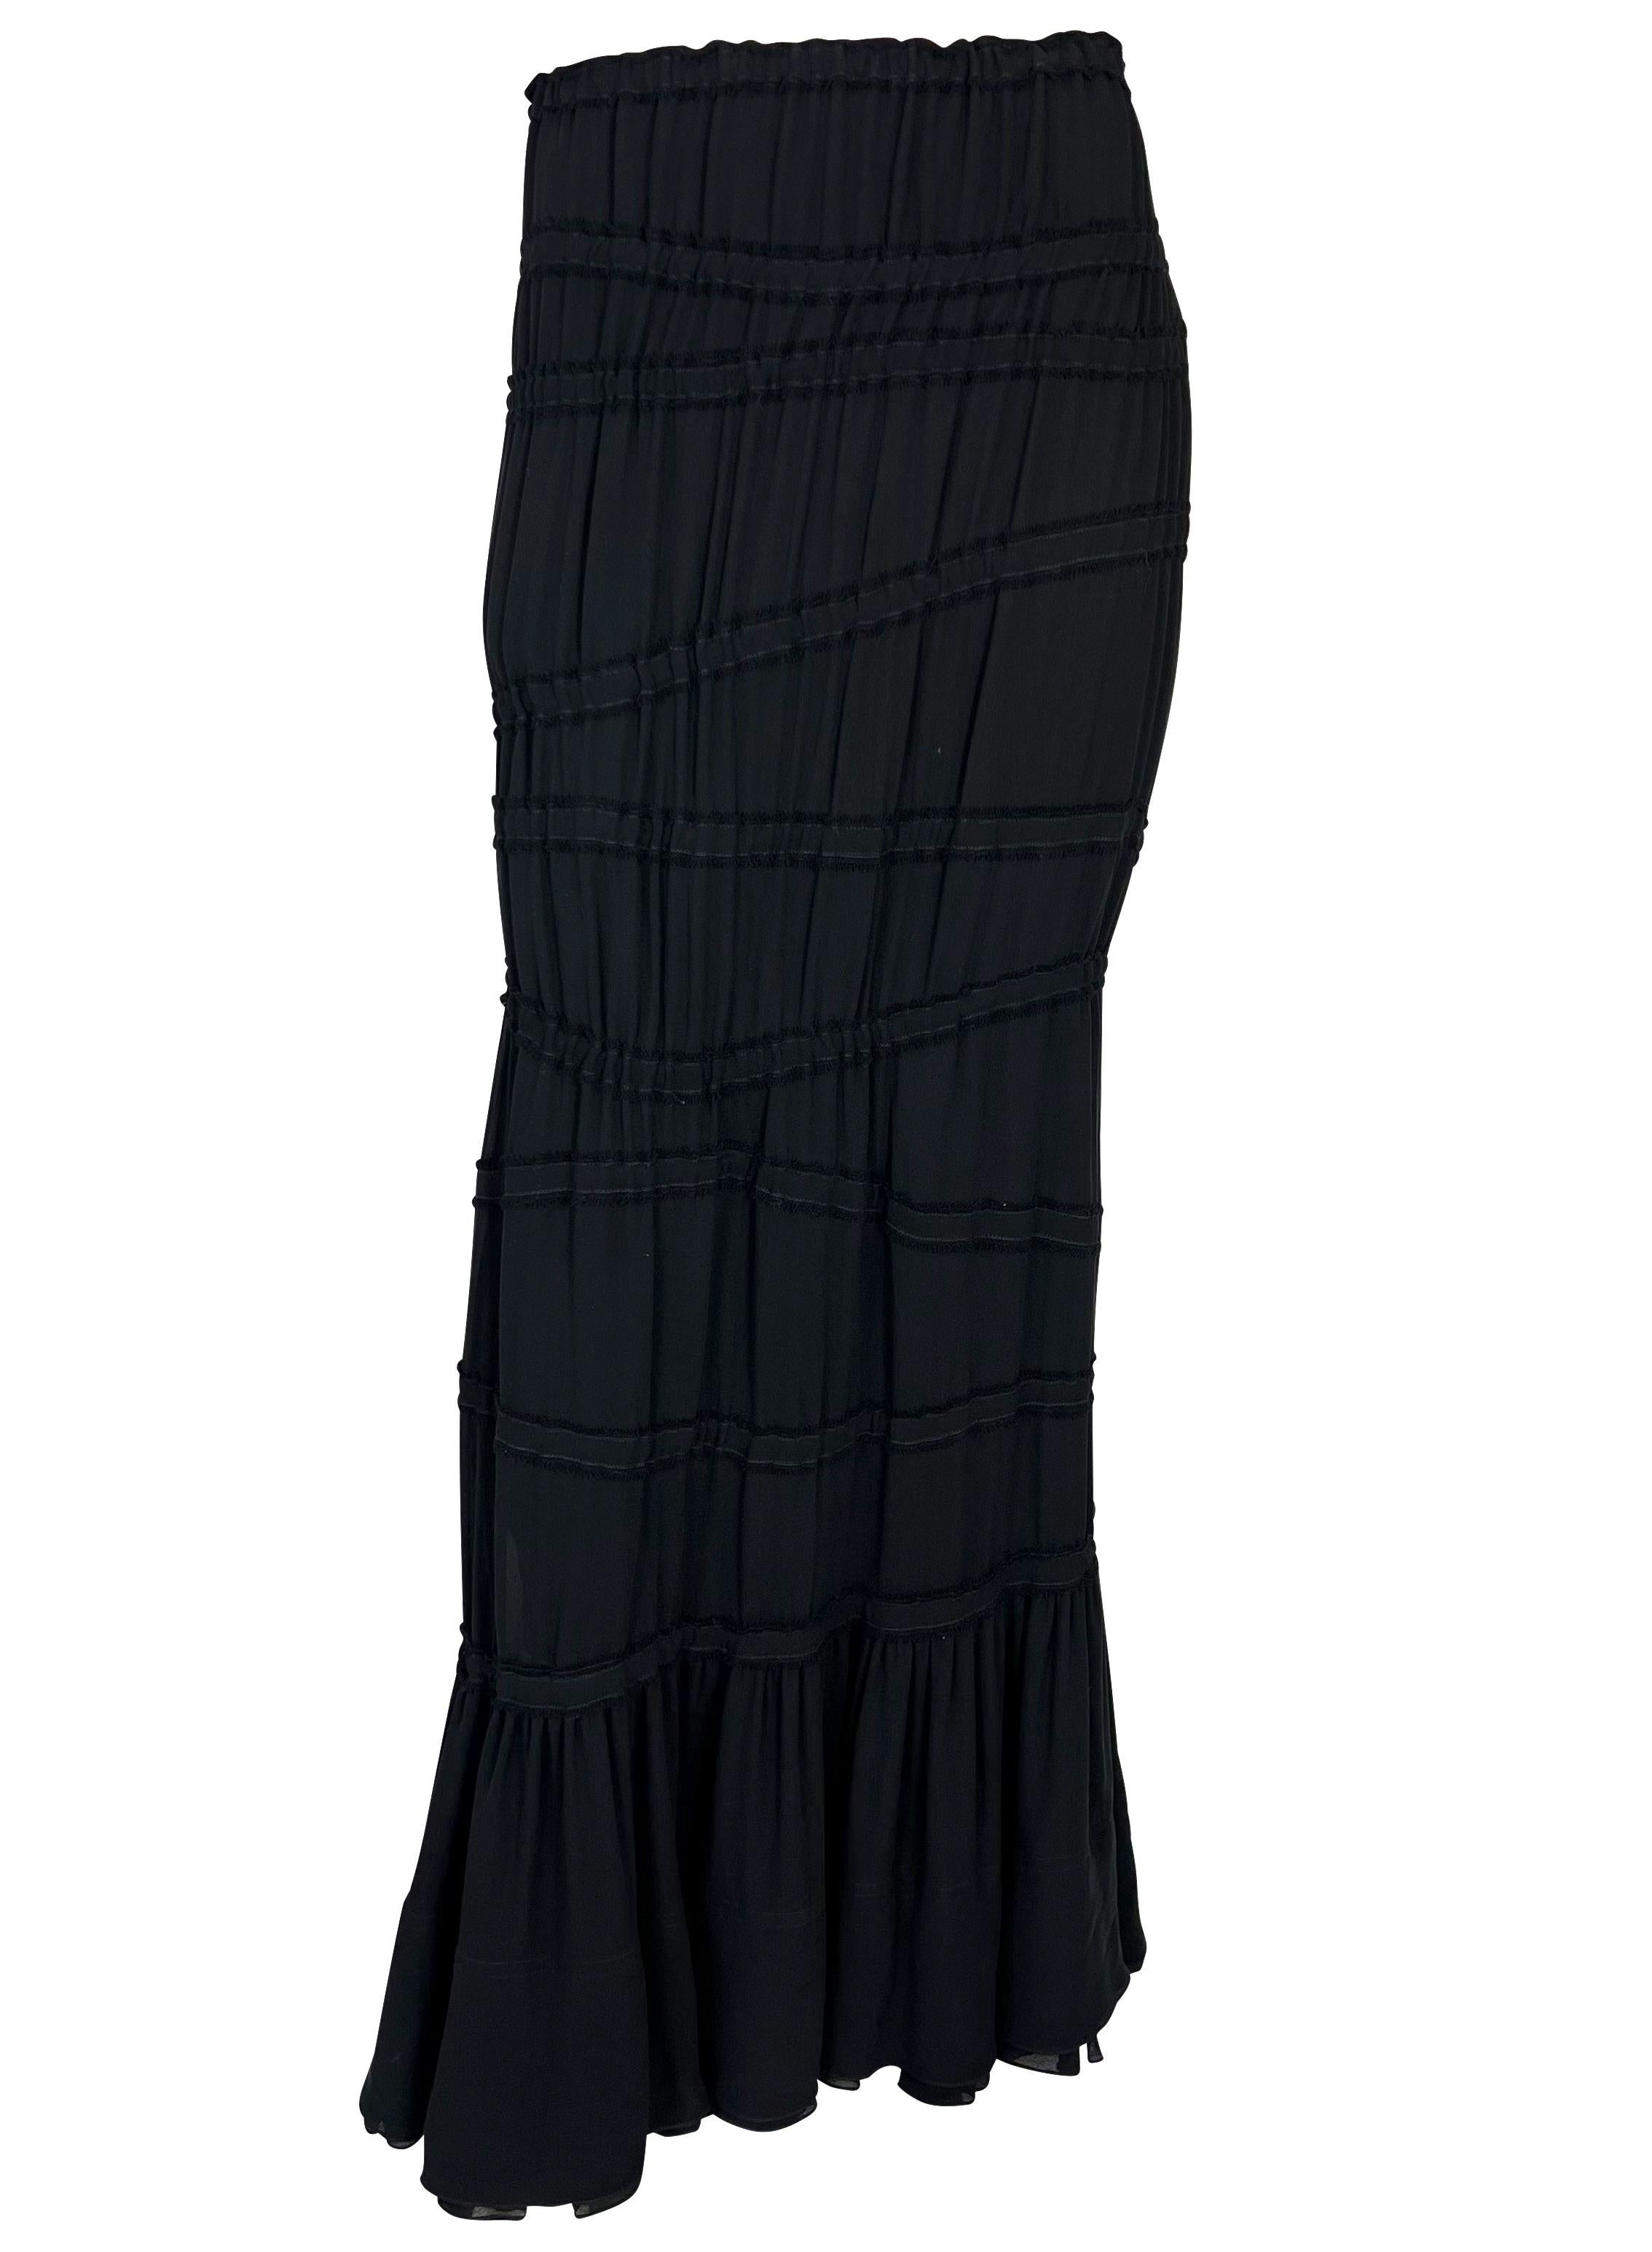 Black F/W 2001 Yves Saint Laurent by Tom Ford Runway Ruched Stretch Flare Maxi Skirt For Sale